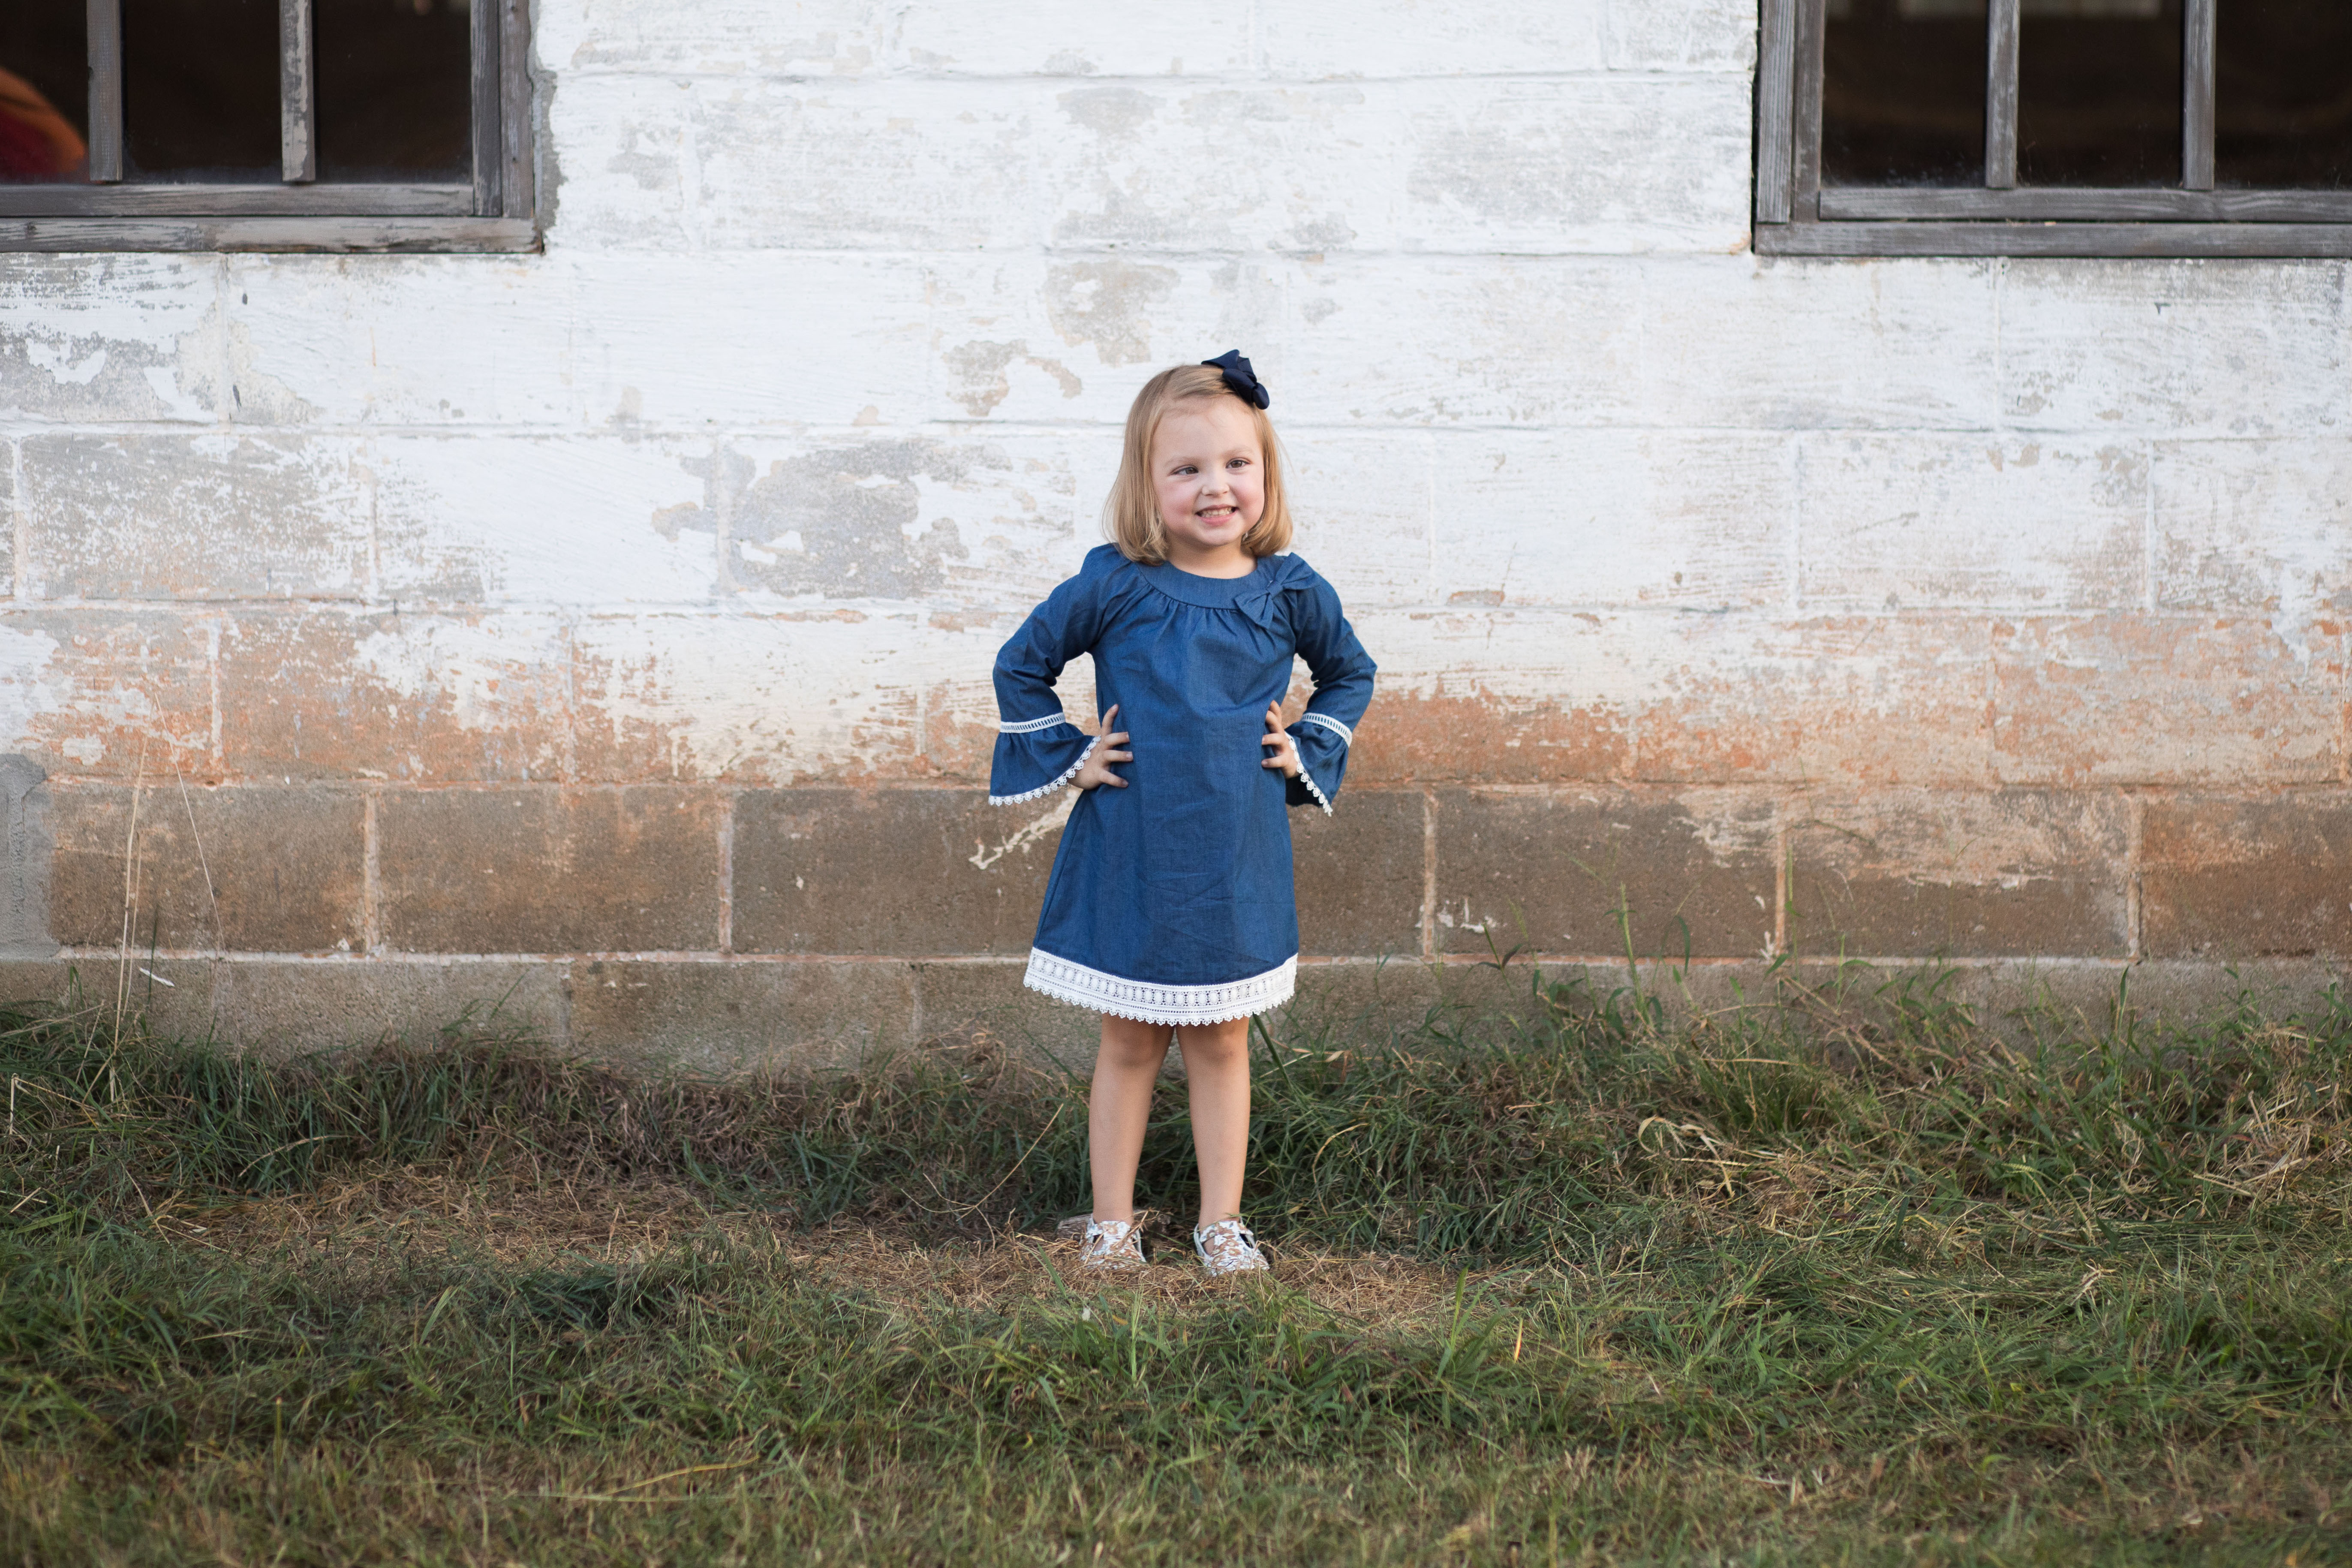 4 year old Photo Session at Vaughters Barn at Arabia Mountain by A Focused Life Photography